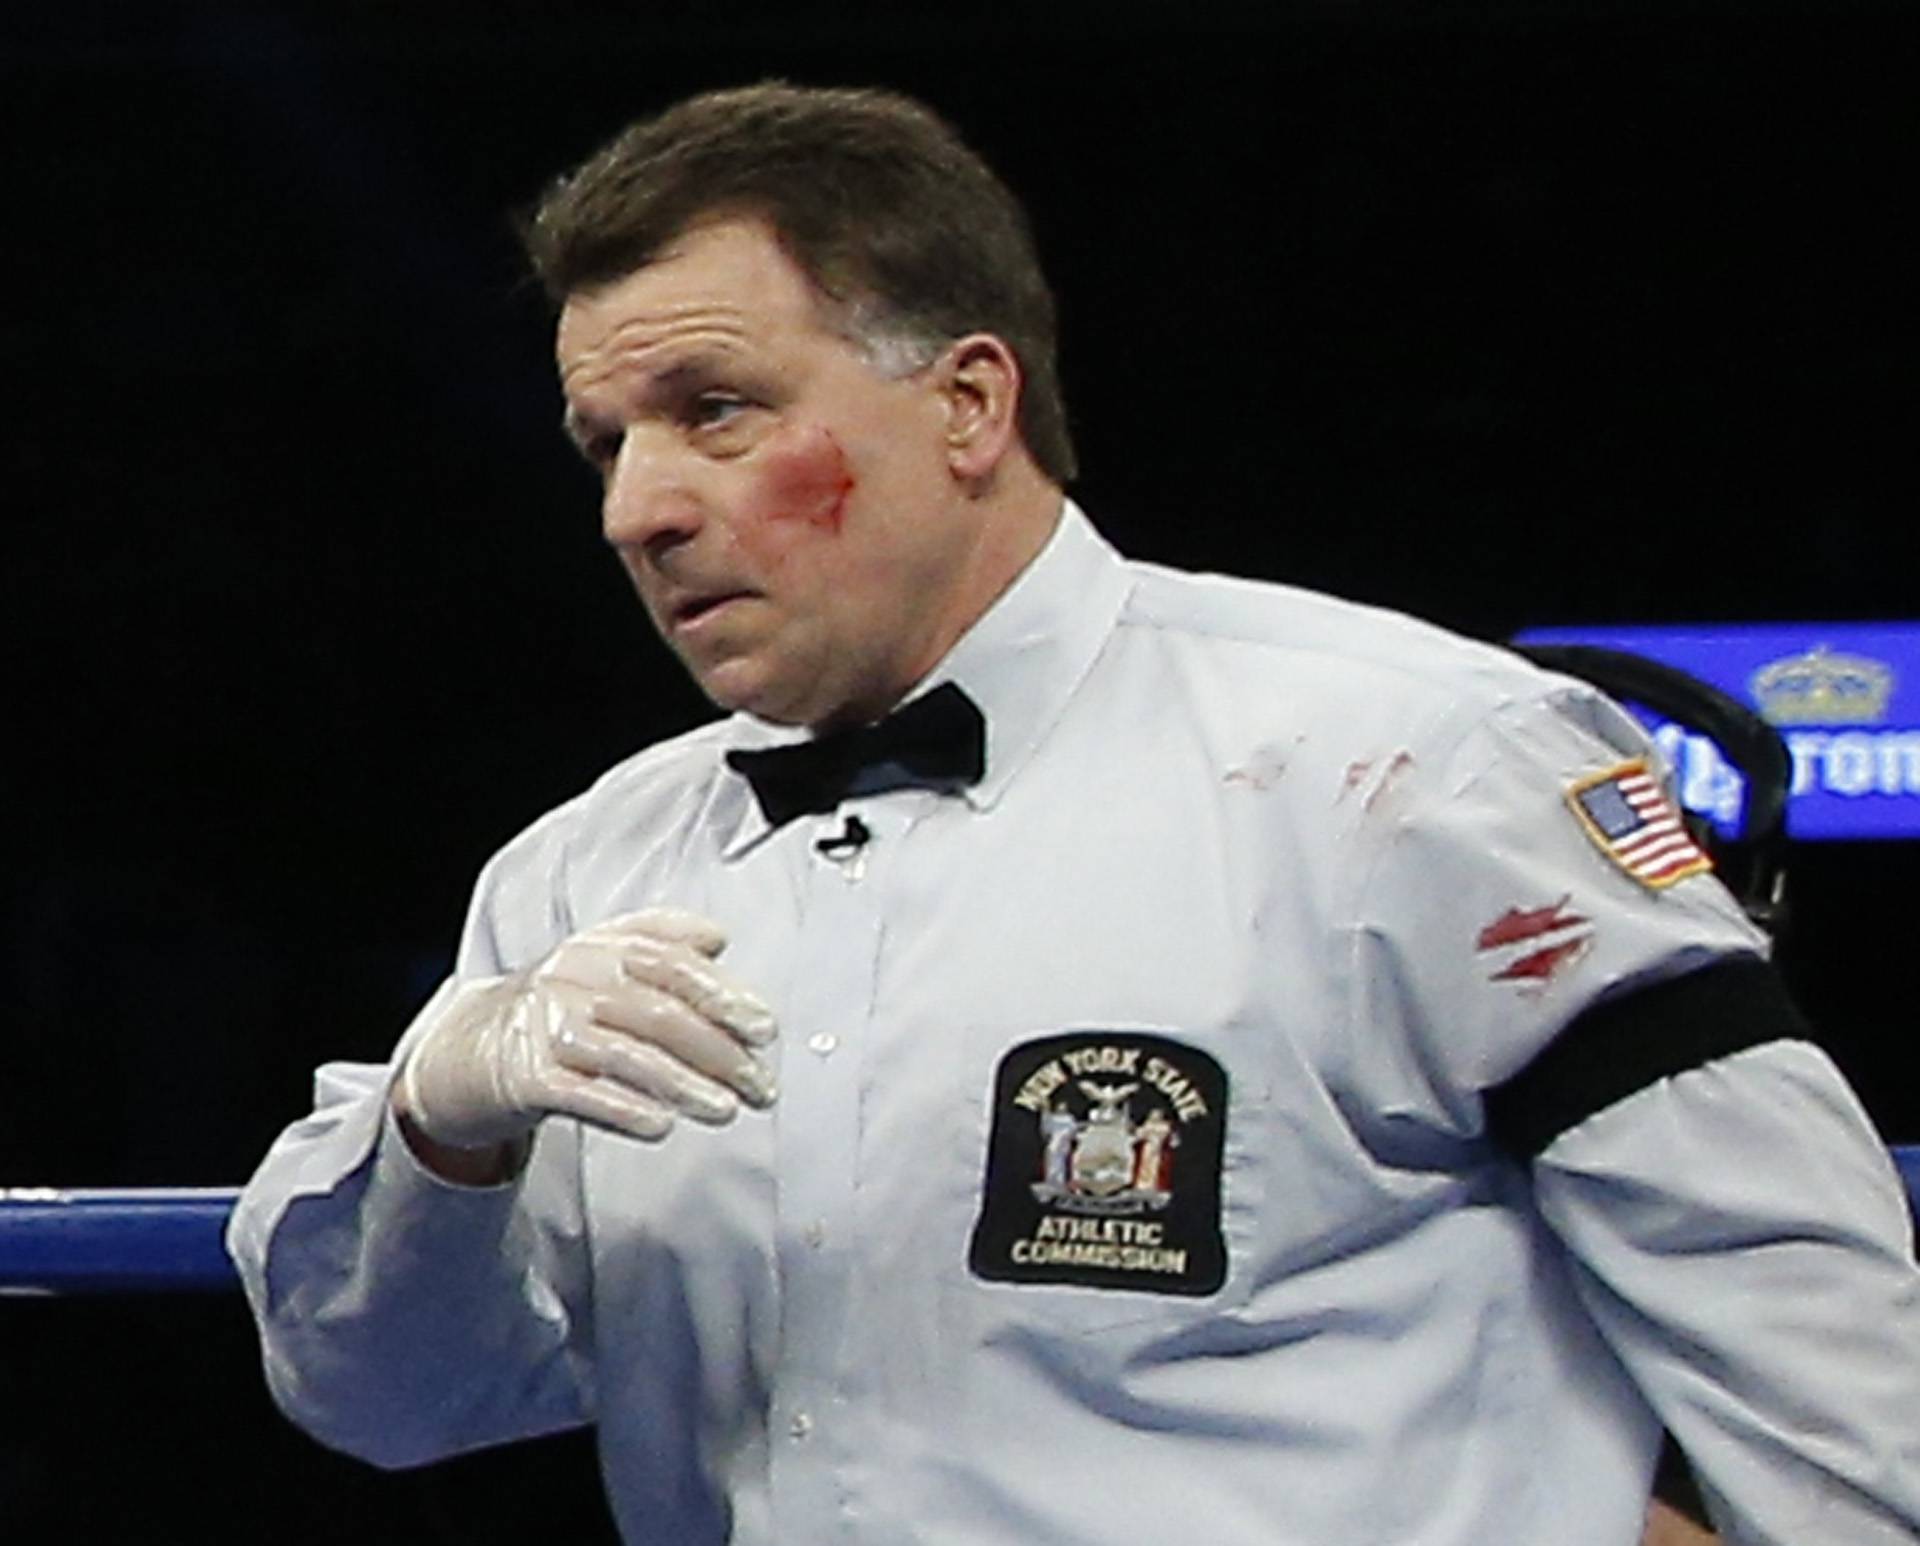 Referee Arthur Mercante Jr has blood on his cheek and shirt  after being hit by Badou Jack